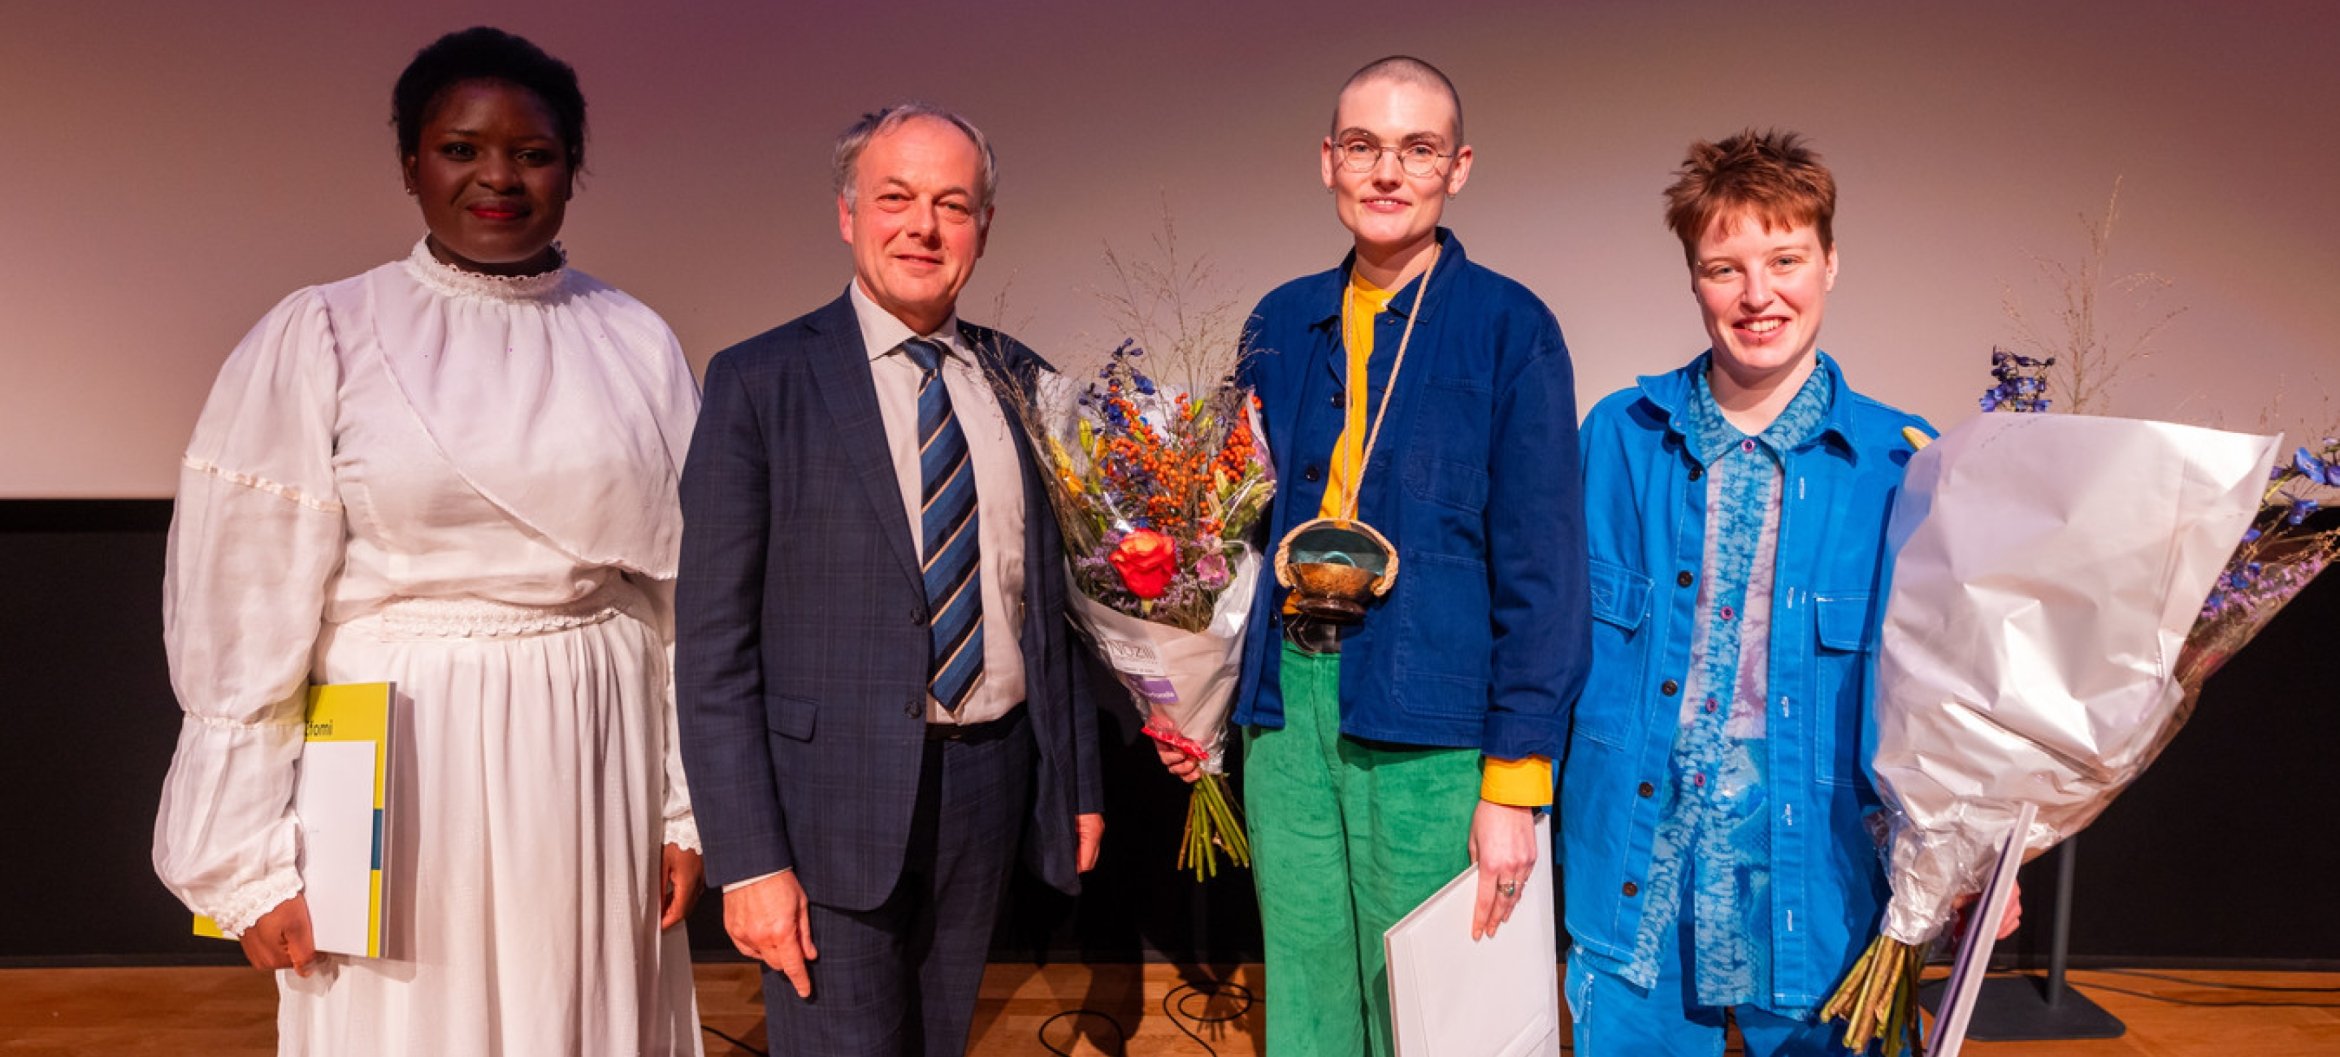 Marieke Polderdijk (second from the right) was presented with the Gelderse Bokaal 2023 by Henri Lenferink, King&#039;s Commissioner and chair of the Gelderland Culture Fund. To his left is Veronique Efomi. To his right is Moni Zwitserloot. © Marco Scheurink